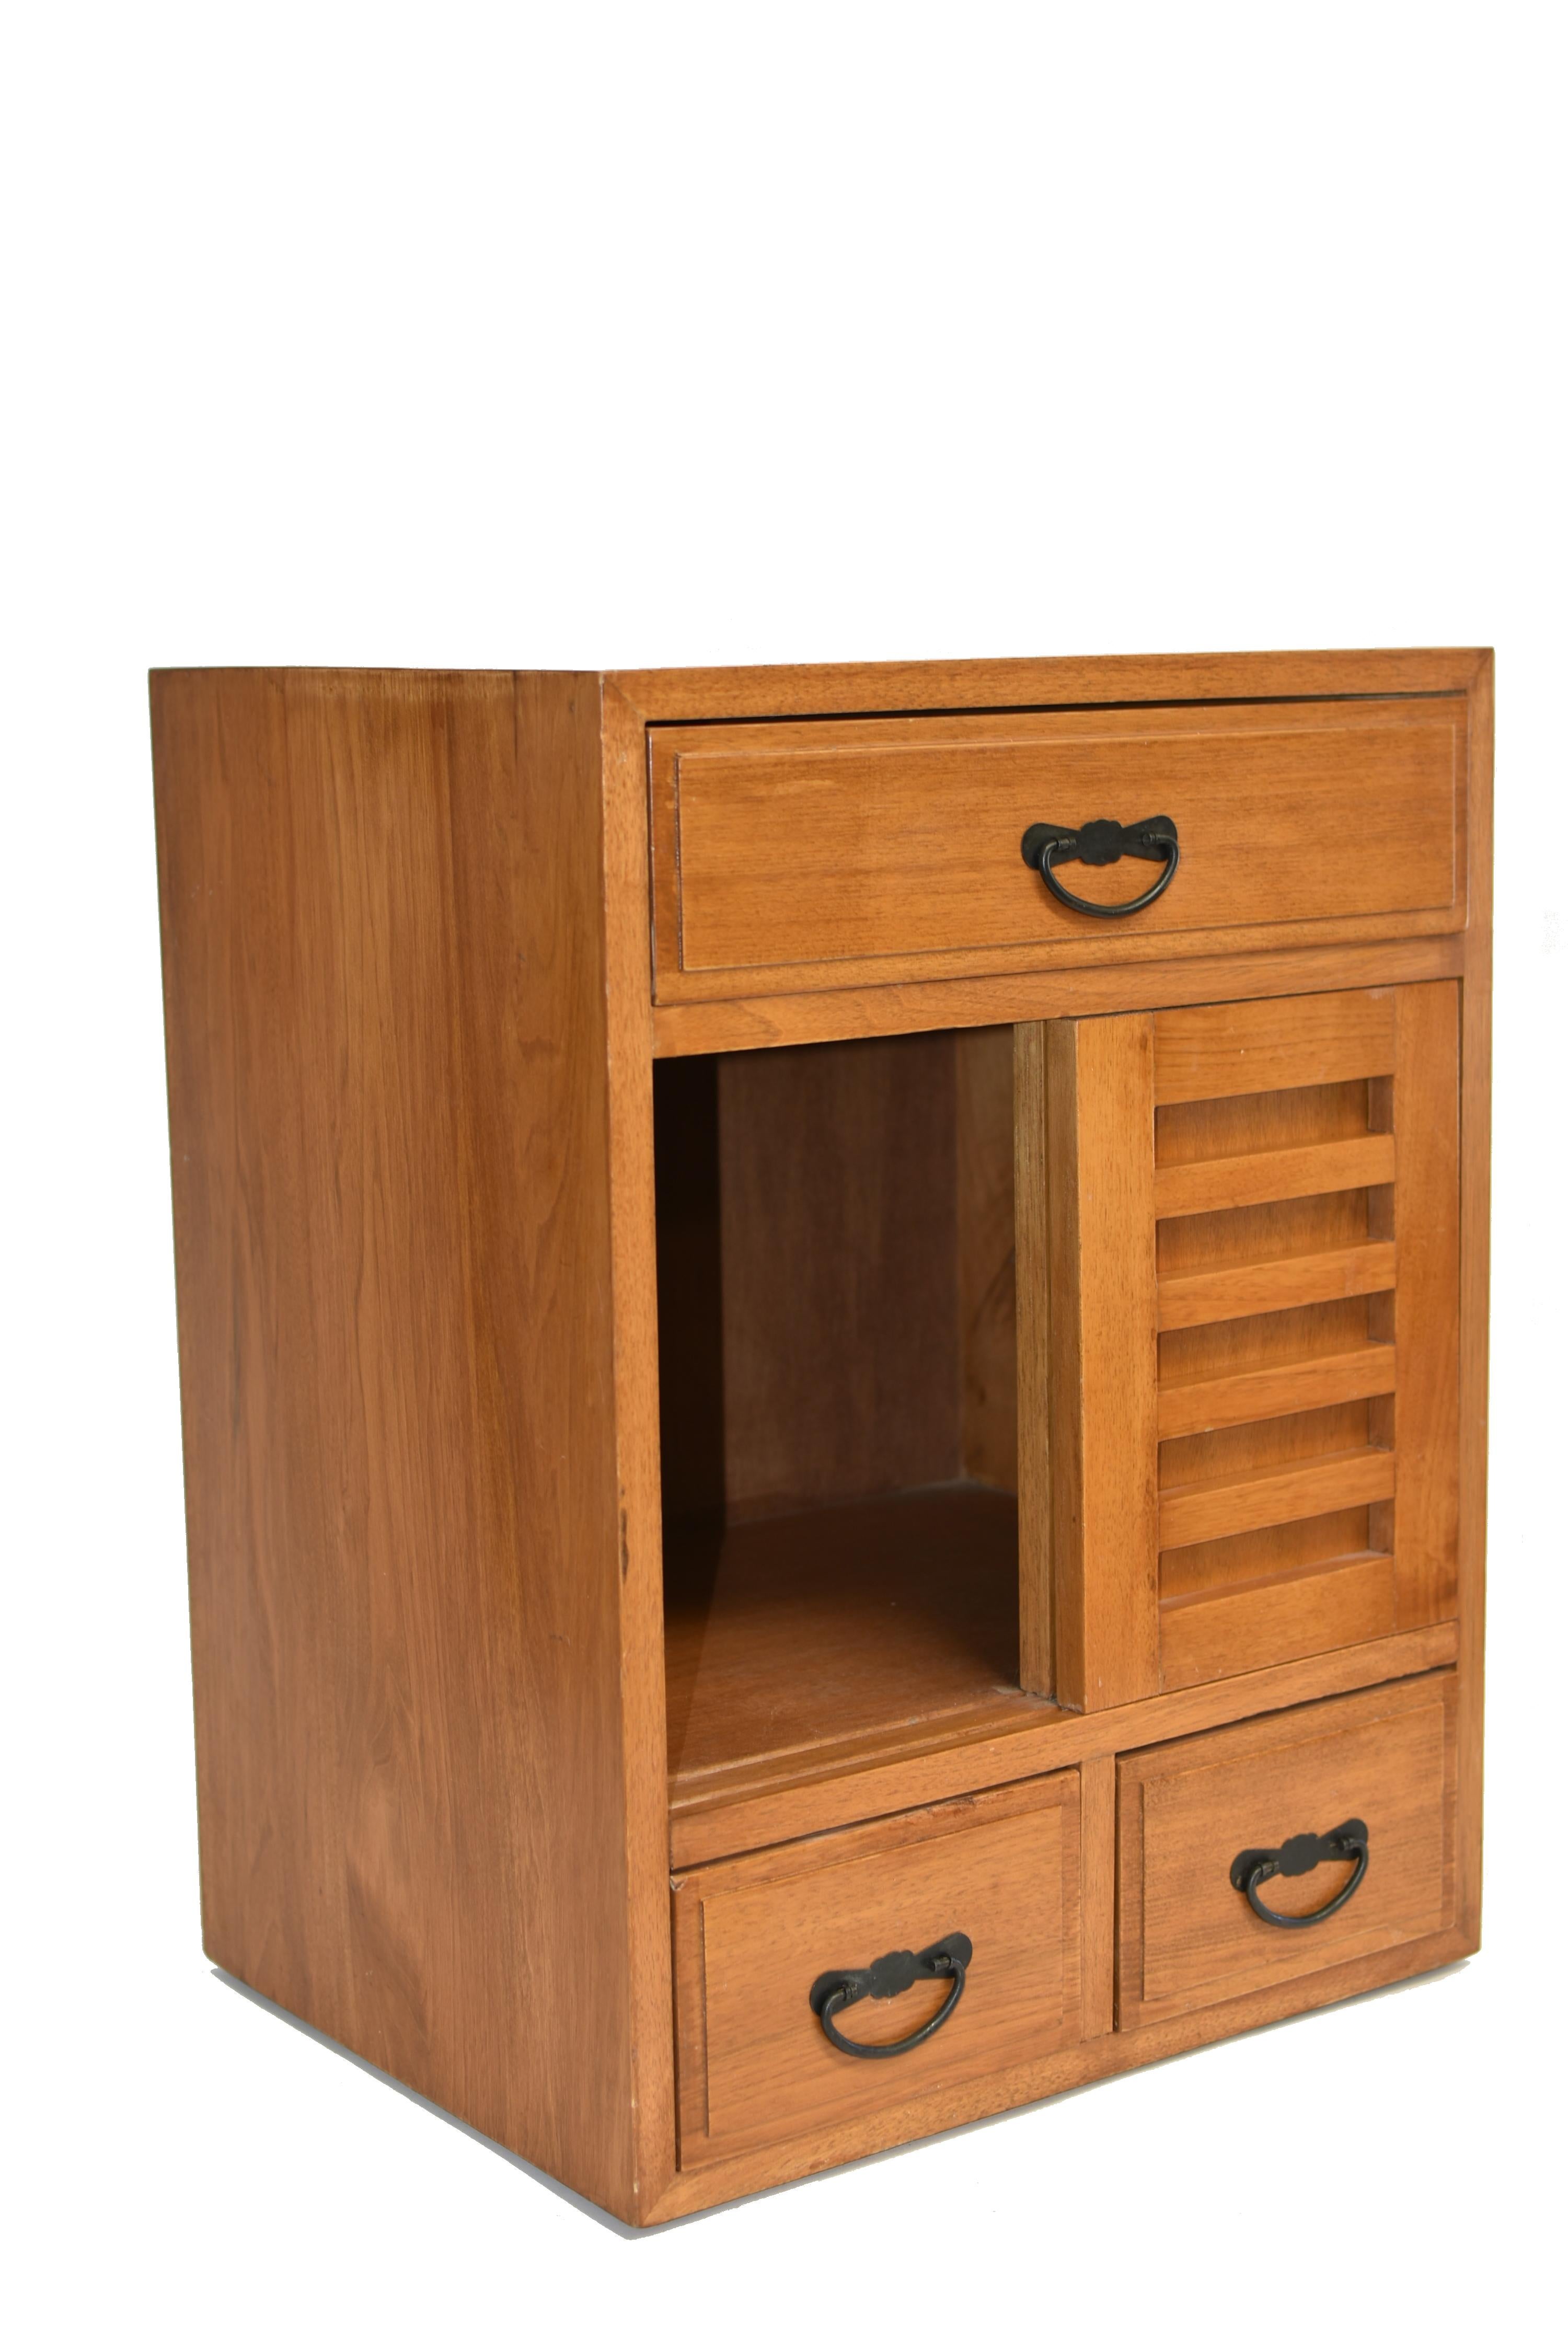 A small vintage solid wood Japanese tansu with 3 full depth drawers and sliding doors. Beautiful, choice woods, solid construction. Doors slide smoothly to conceal a large storage space. A functional, versatile piece for your home and office. In